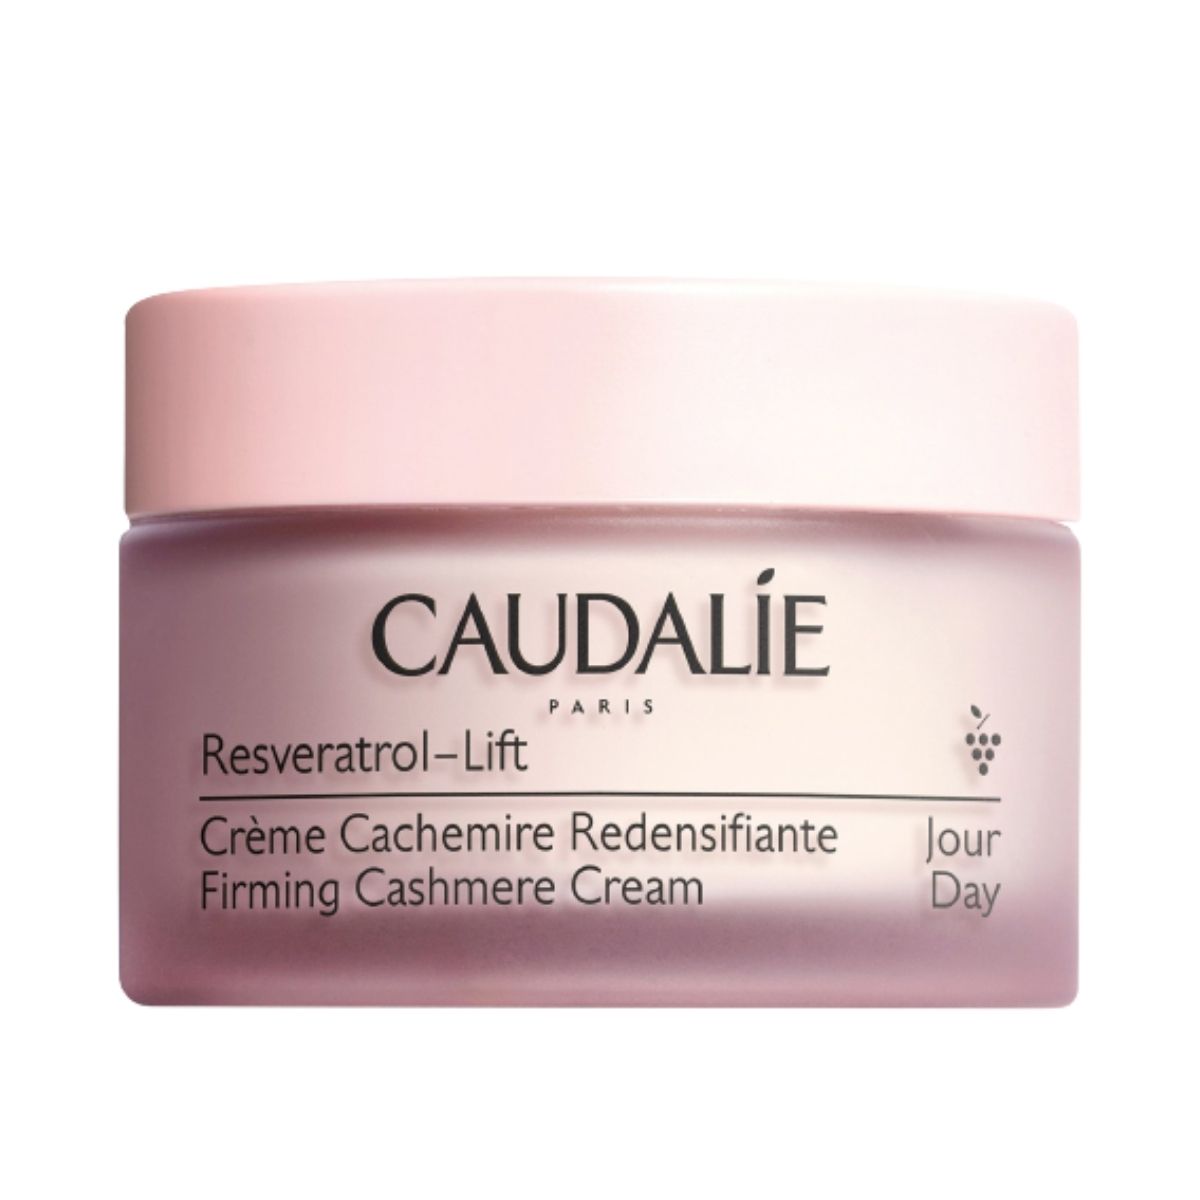 🎁 Free Caudalie Resveratrol Firming Cashmere Cream 15ml worth €23 when you buy any RESVERATROL LIFT product from Caudalie. One Gift per person. While Stocks last. (100% off)